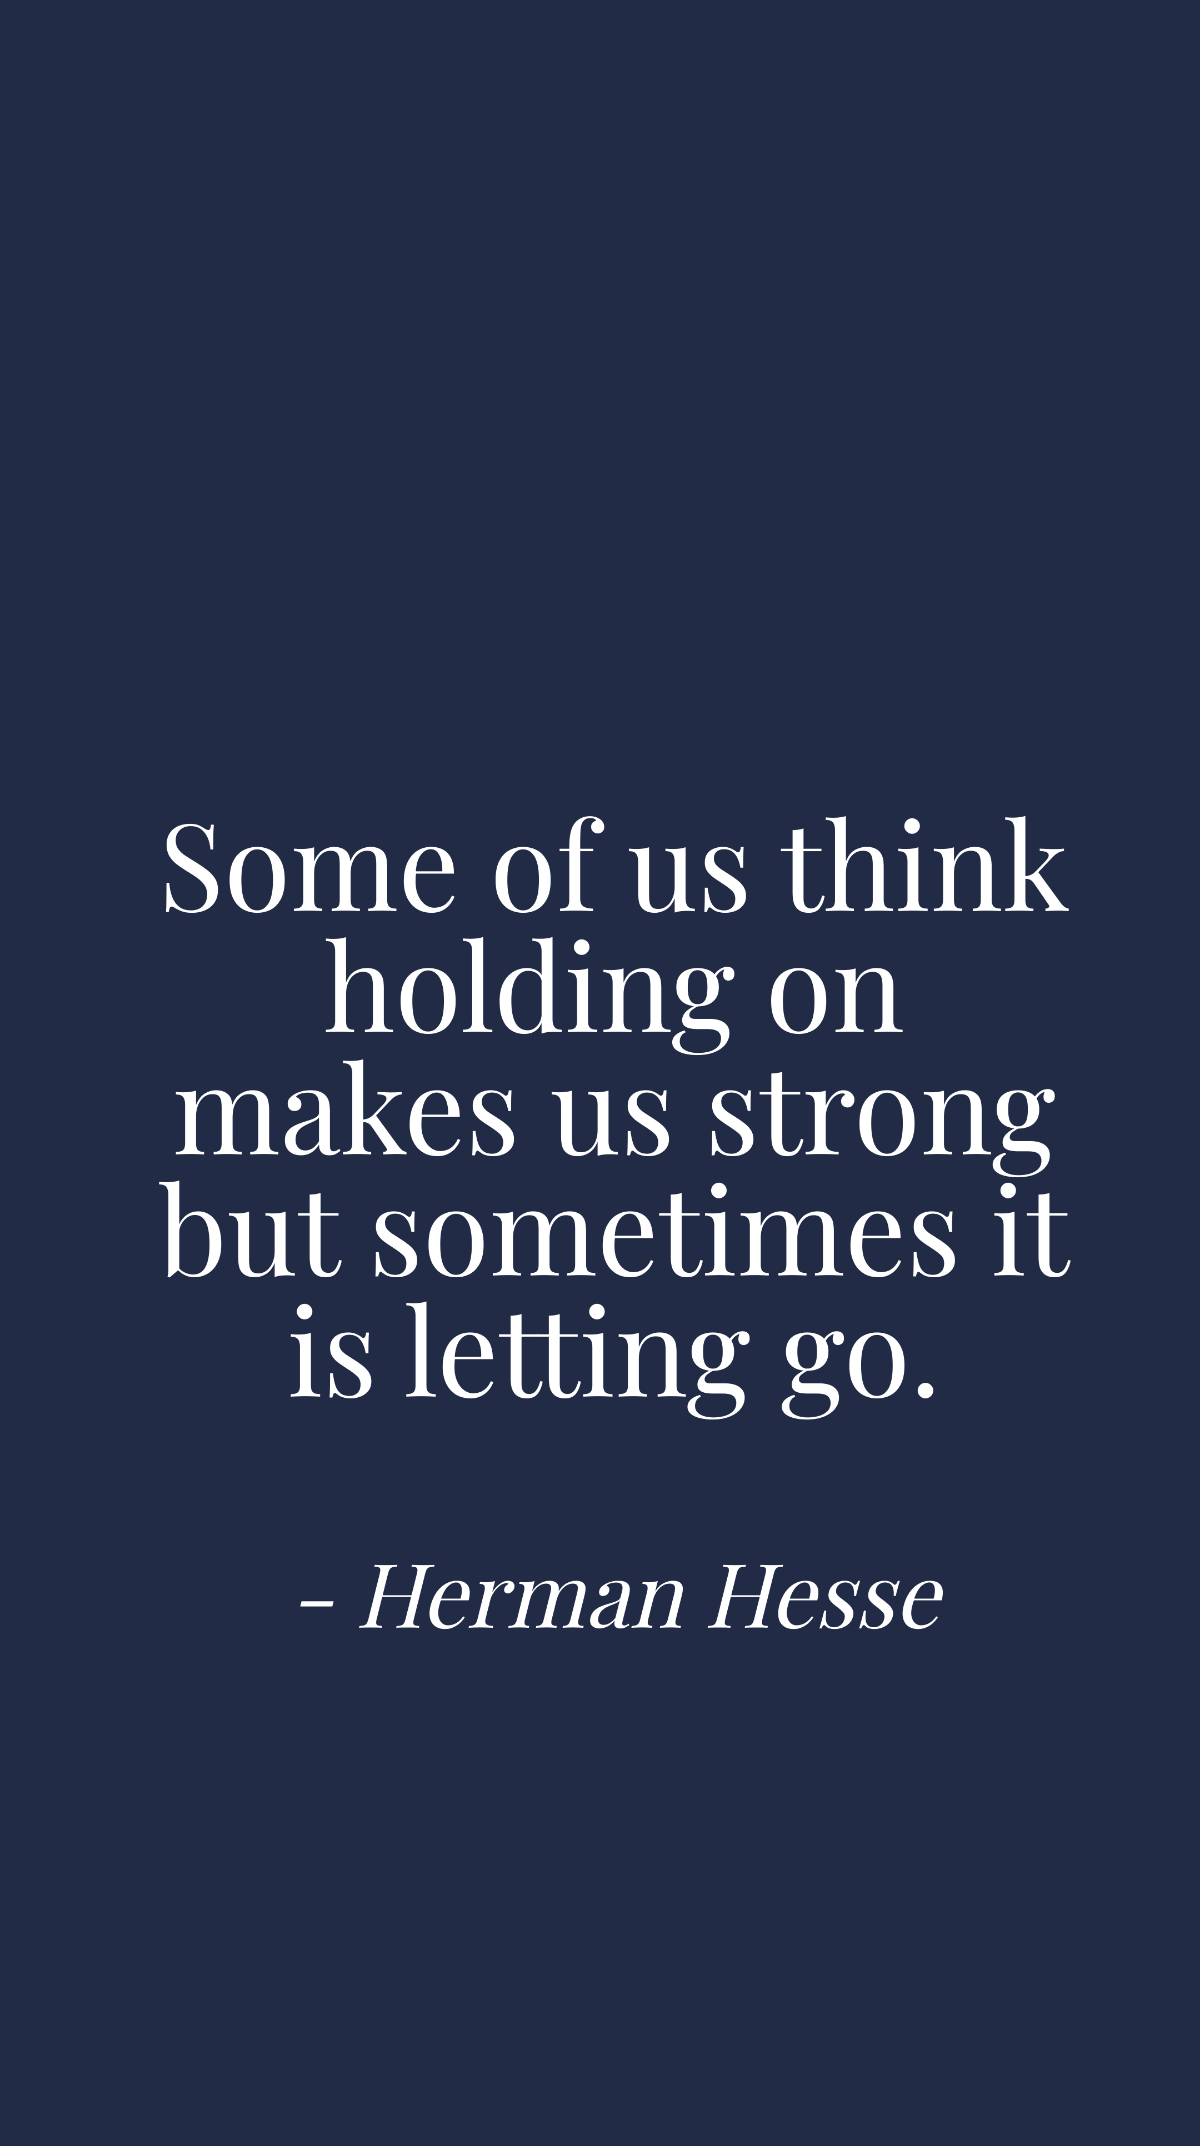 Herman Hesse - Some of us think holding on makes us strong but sometimes it is letting go. Template